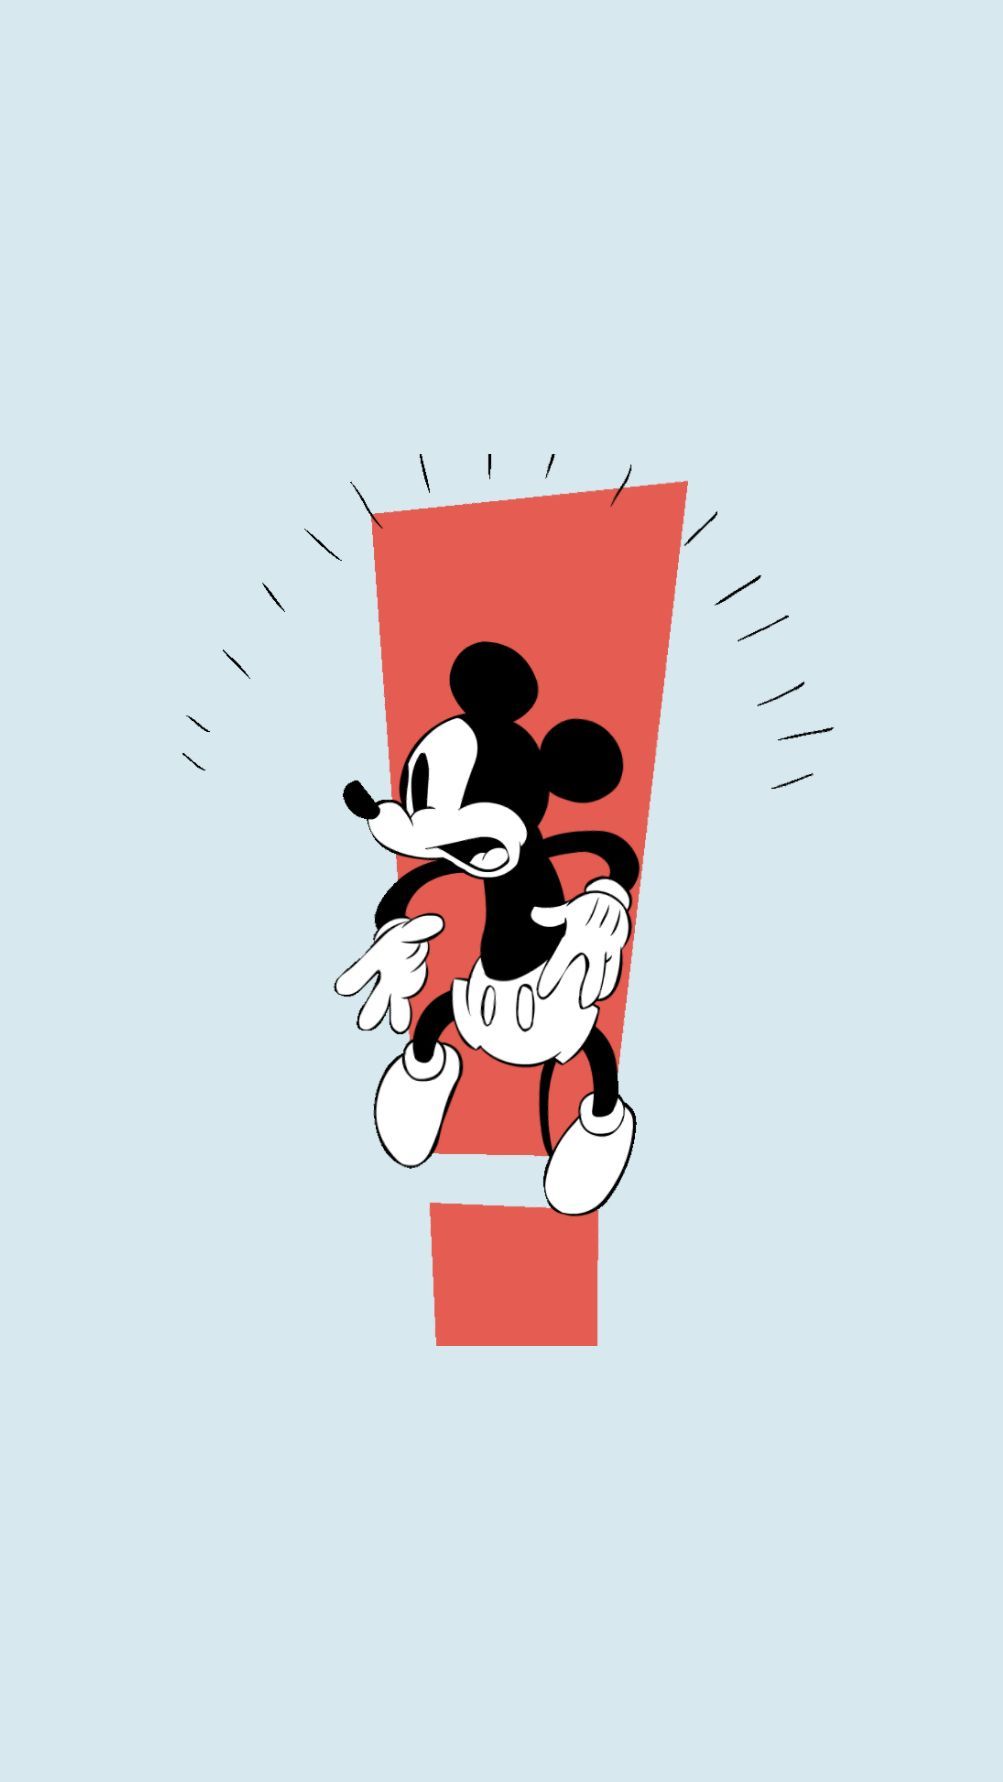 iPhone Wallpaper HD from Uploaded by user. Mickey mouse